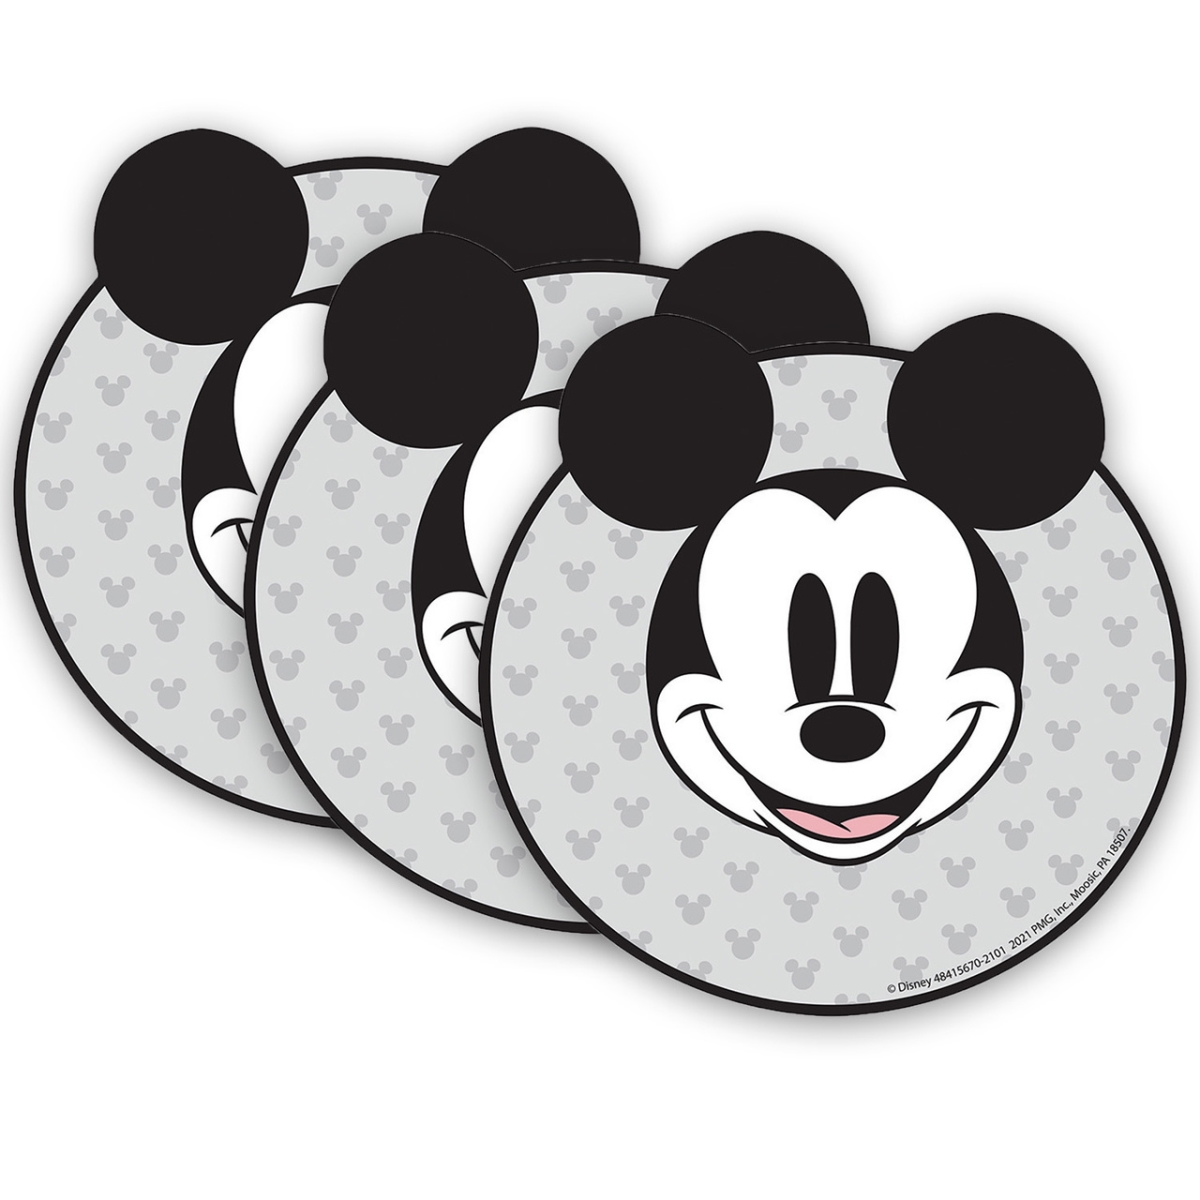 Picture of Eureka EU-841567-3 Mickey Mouse Throwback Paper Cut-Outs - Pack of 3